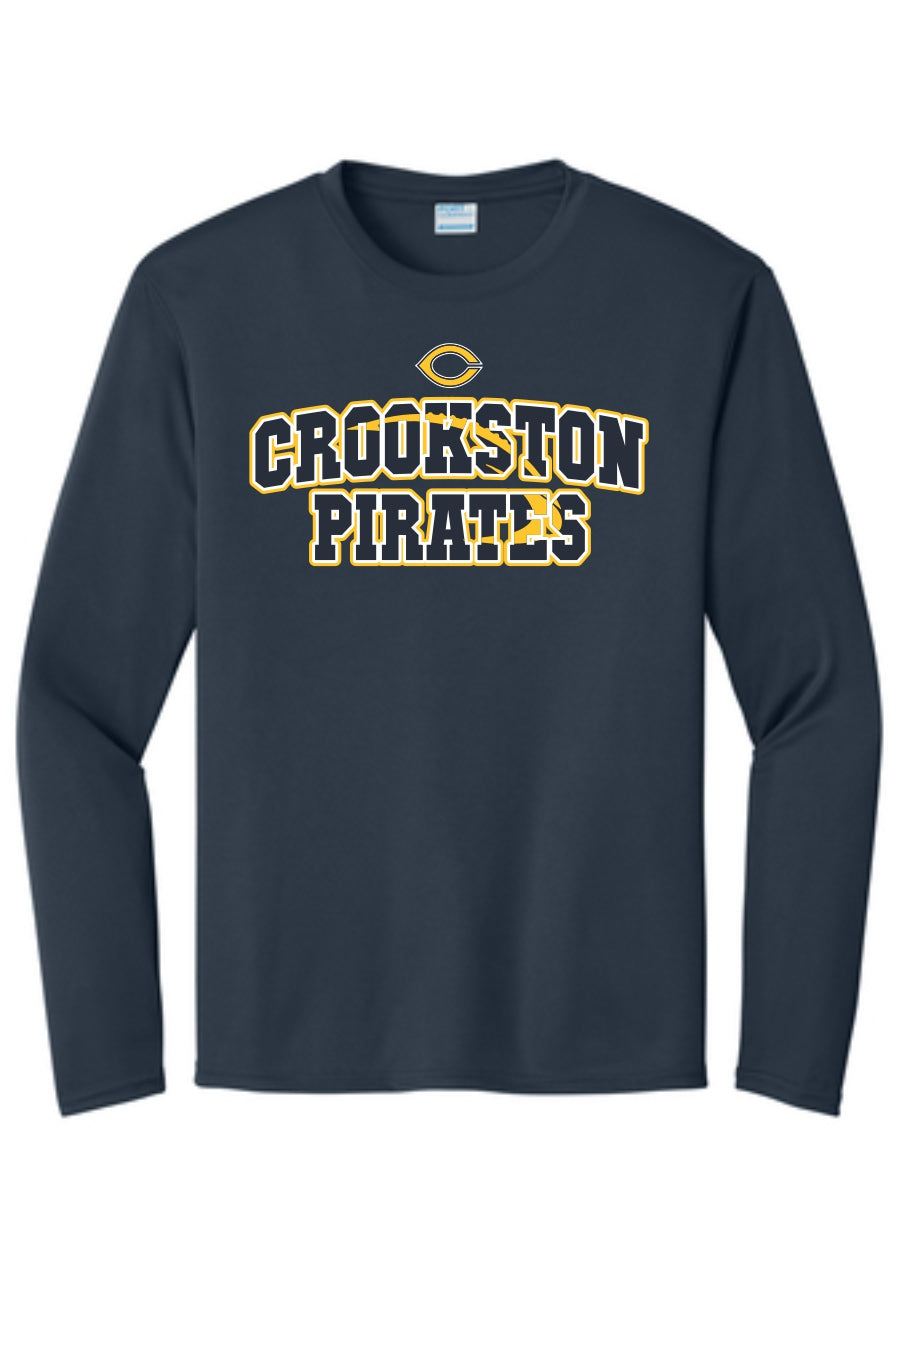 Pirate Football -- Performance LS -- Adult/Youth